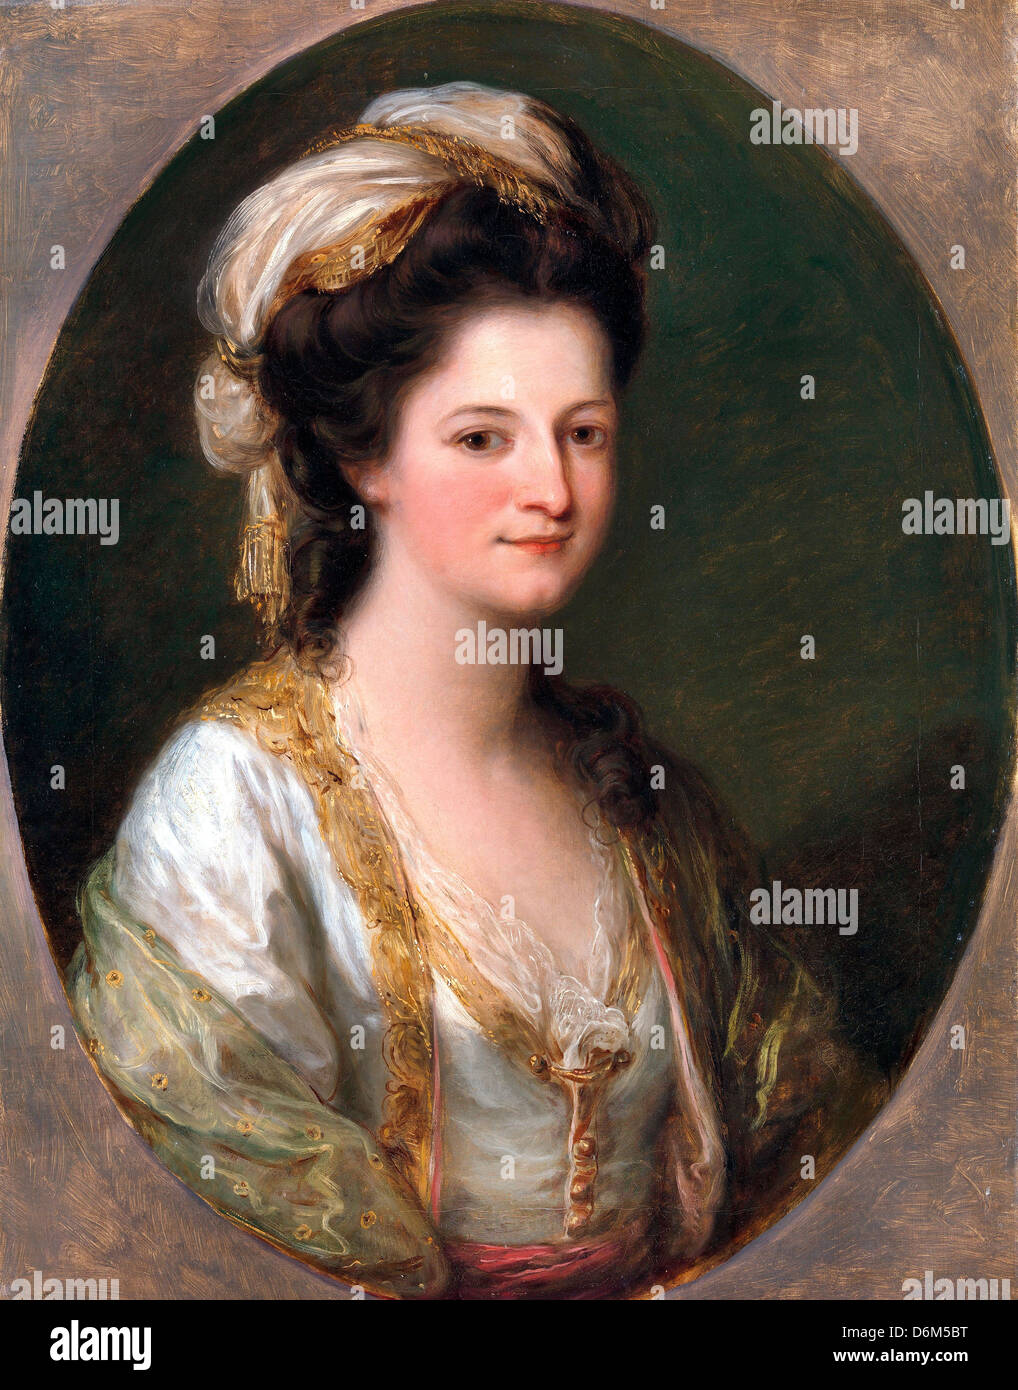 Angelica Kauffman, Portrait of a woman, traditionally identified as Lady Hervey. Circa 1770. Oil on canvas. Stock Photo